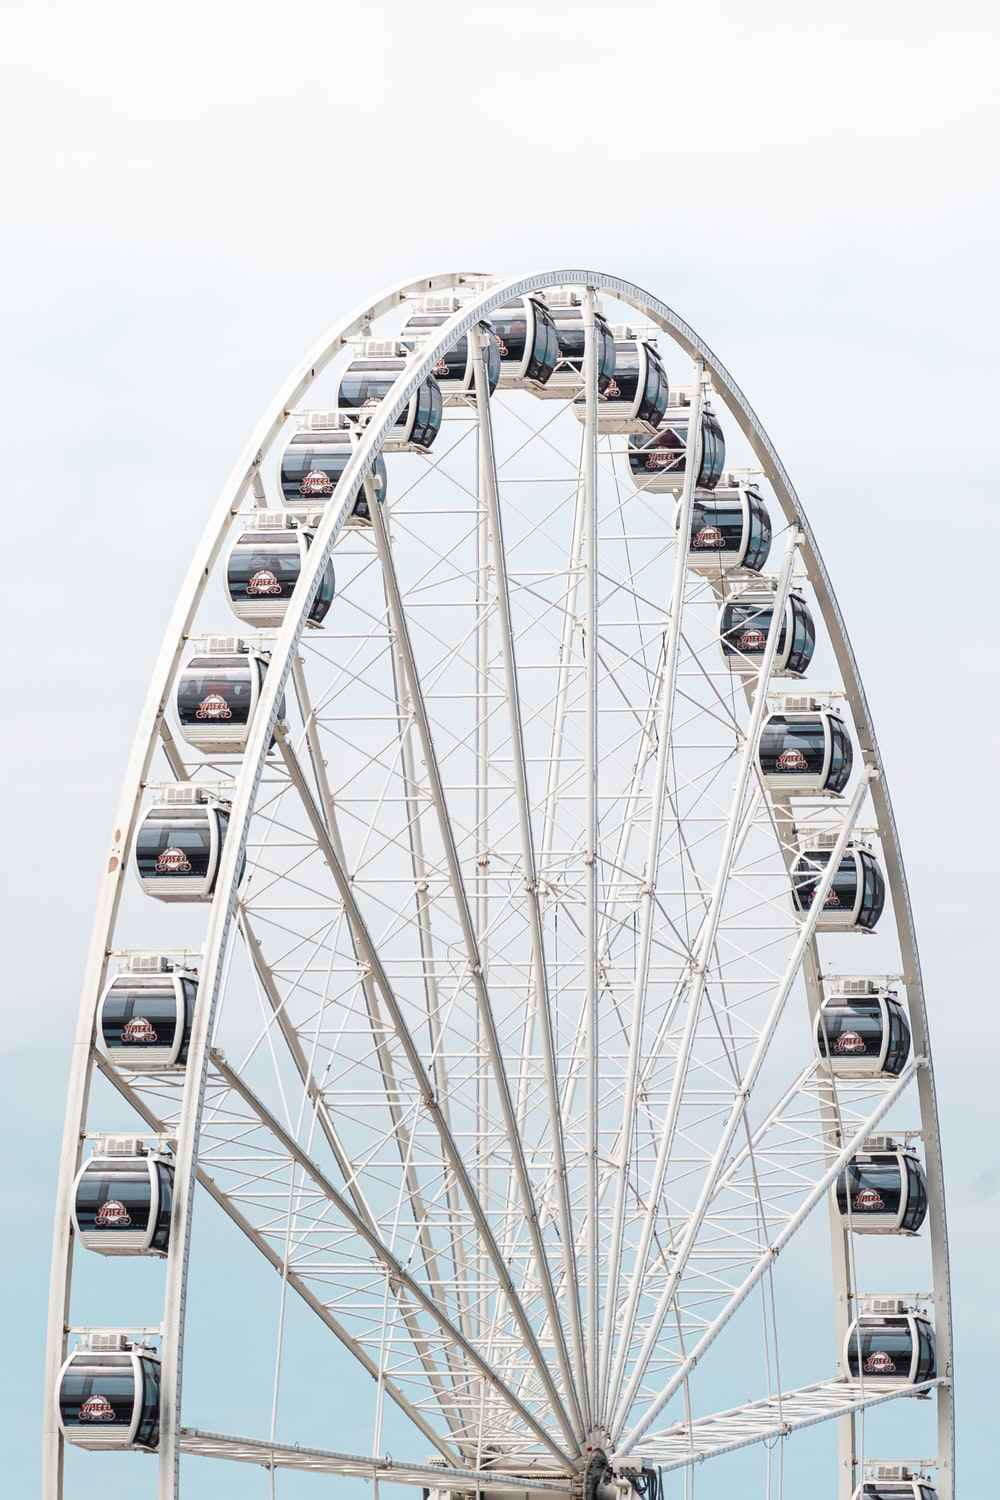 Ferris Wheel Picture. Download Free Image